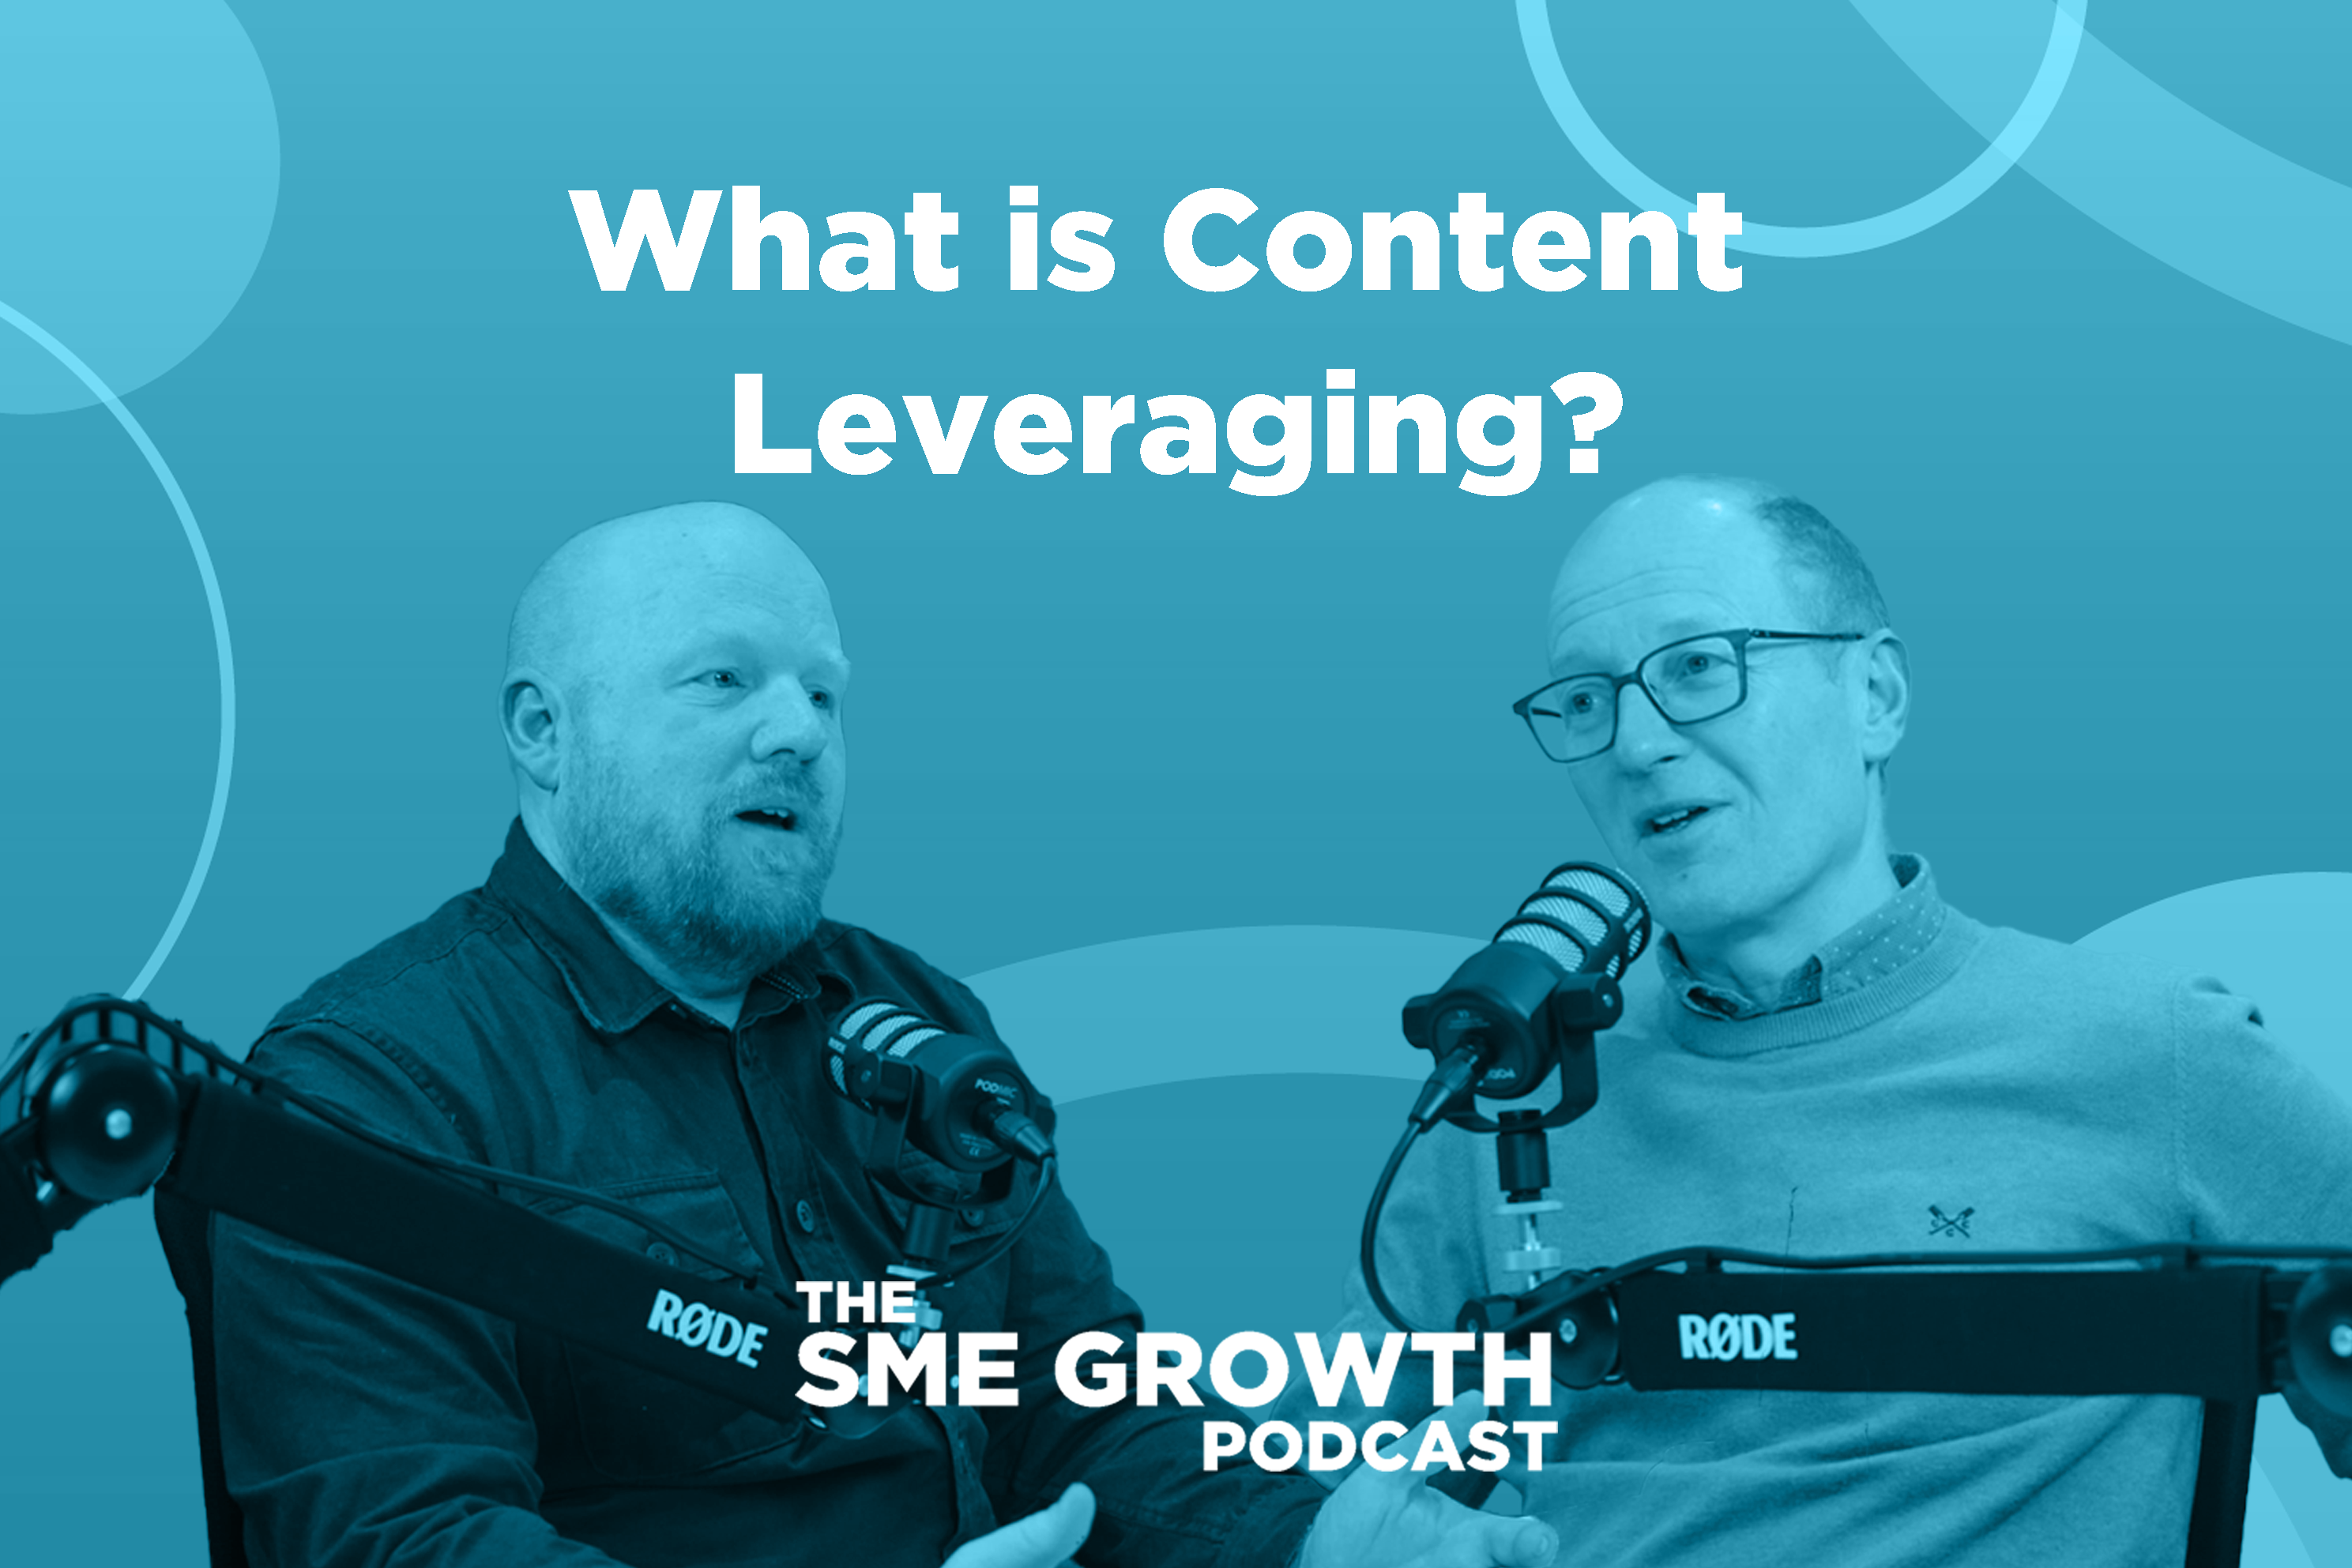 What is Content Leveraging? The SME Growth Podcast. Two males on blue background talking into microphones